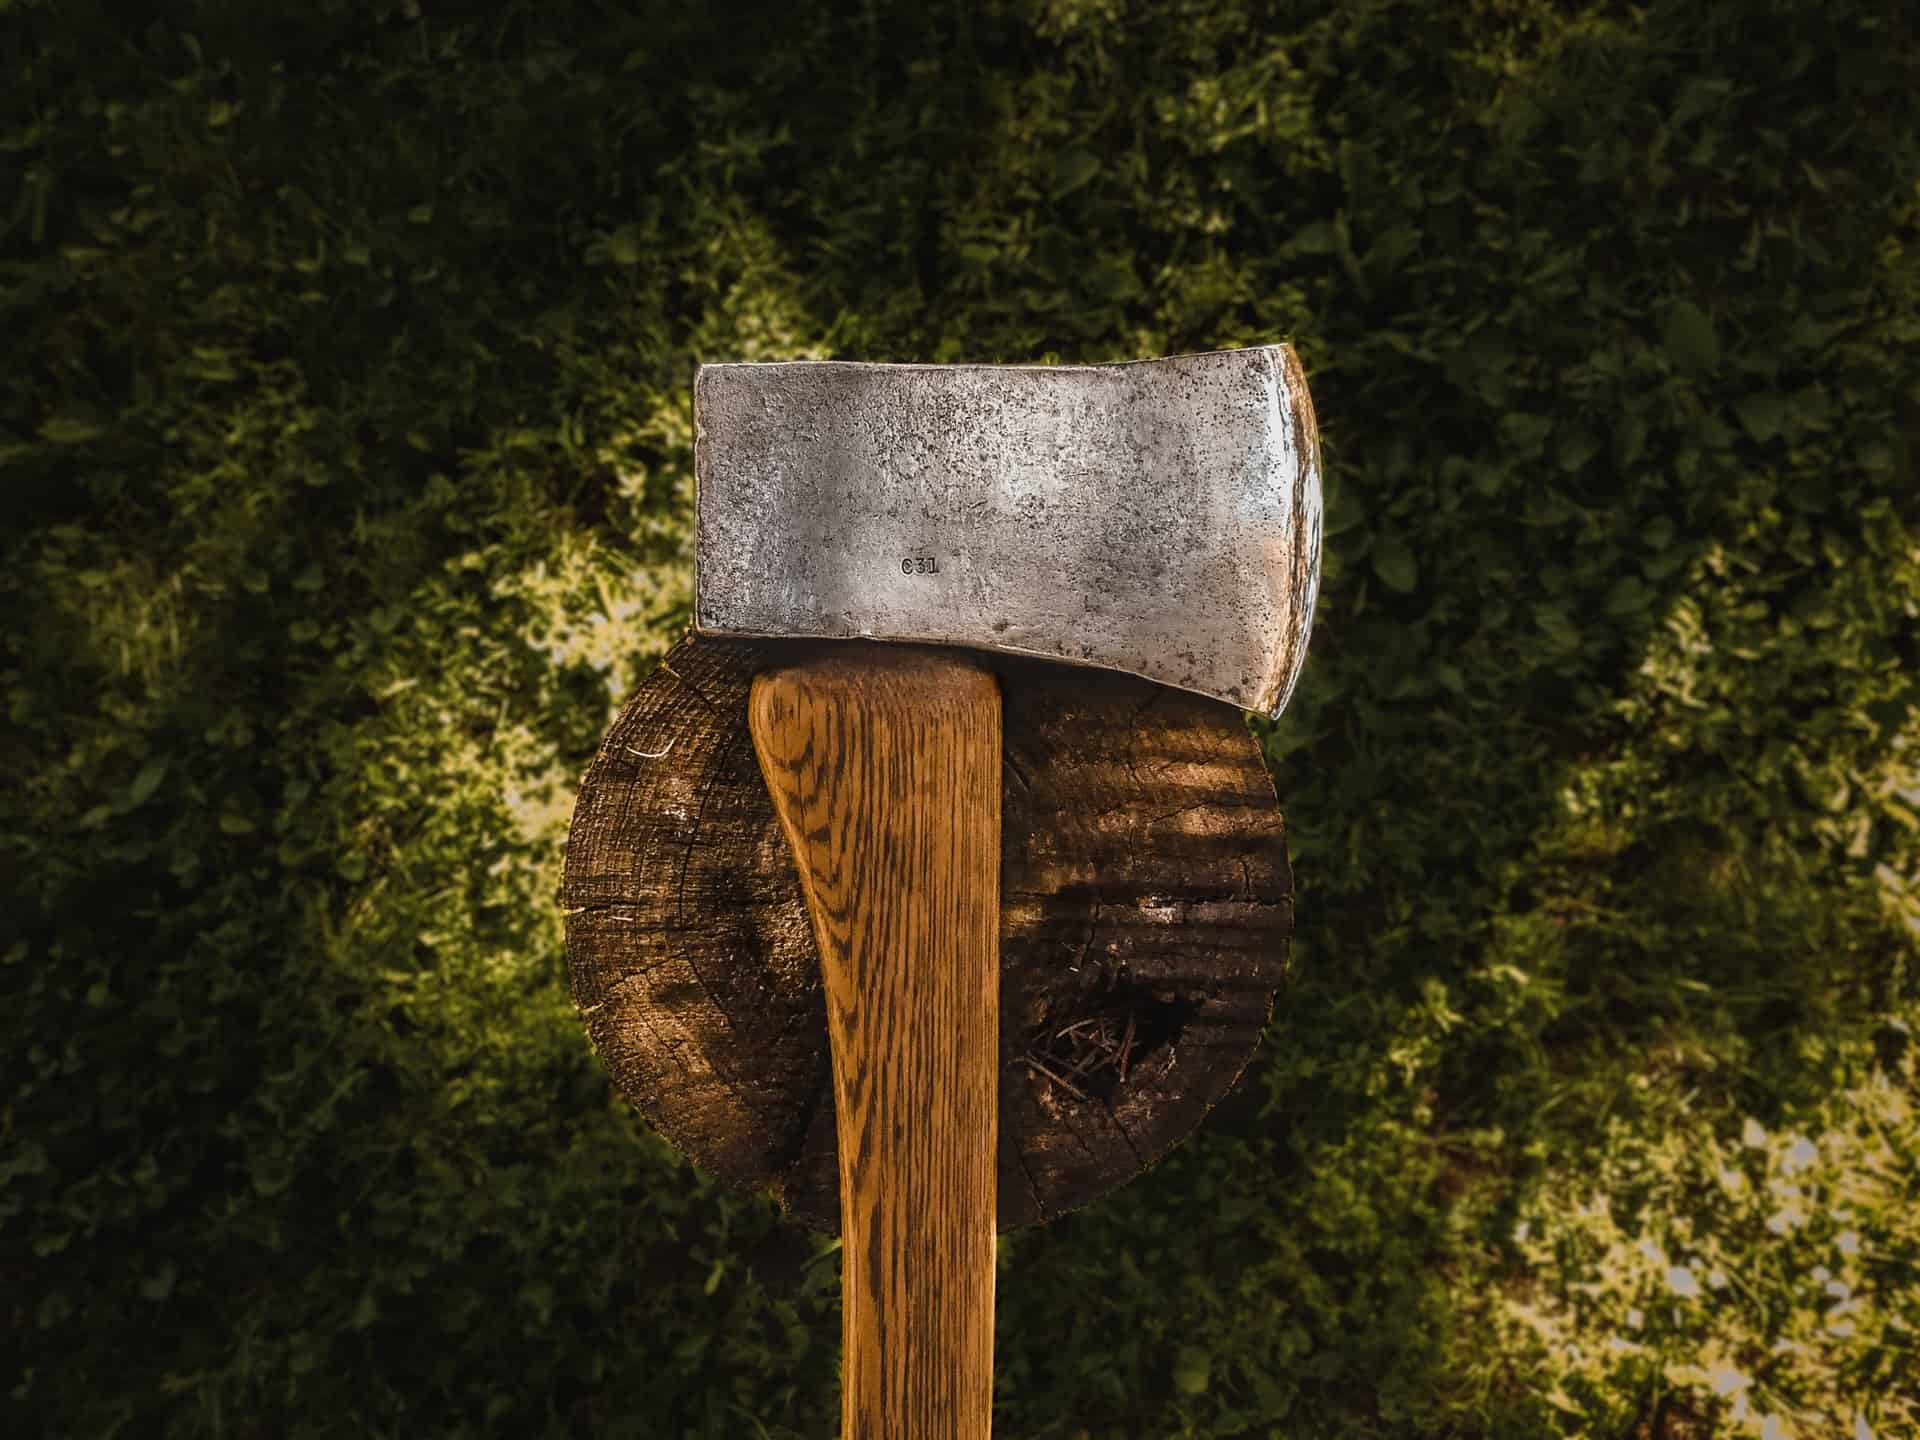 The splitting axe. What do we use it for?